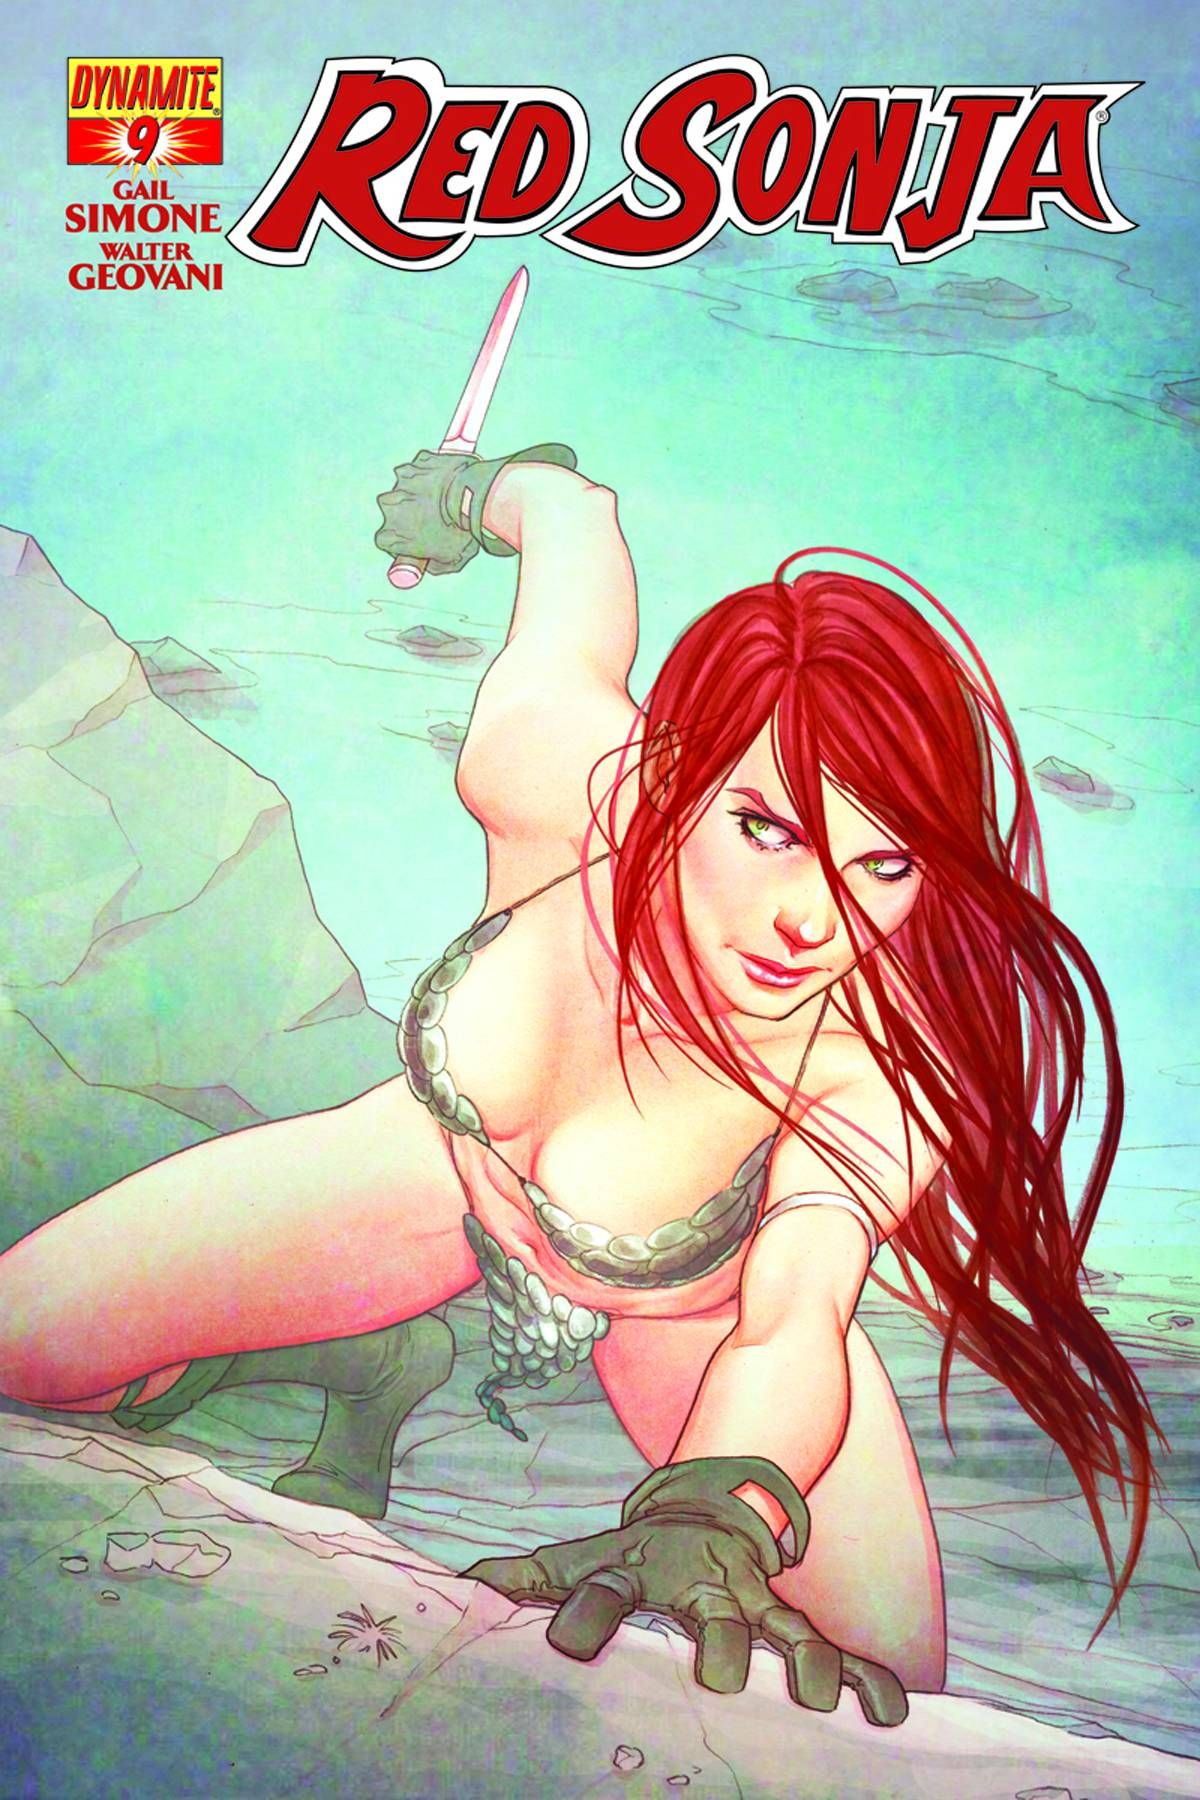 Red Sonja #9 (Frison Cover) Comic